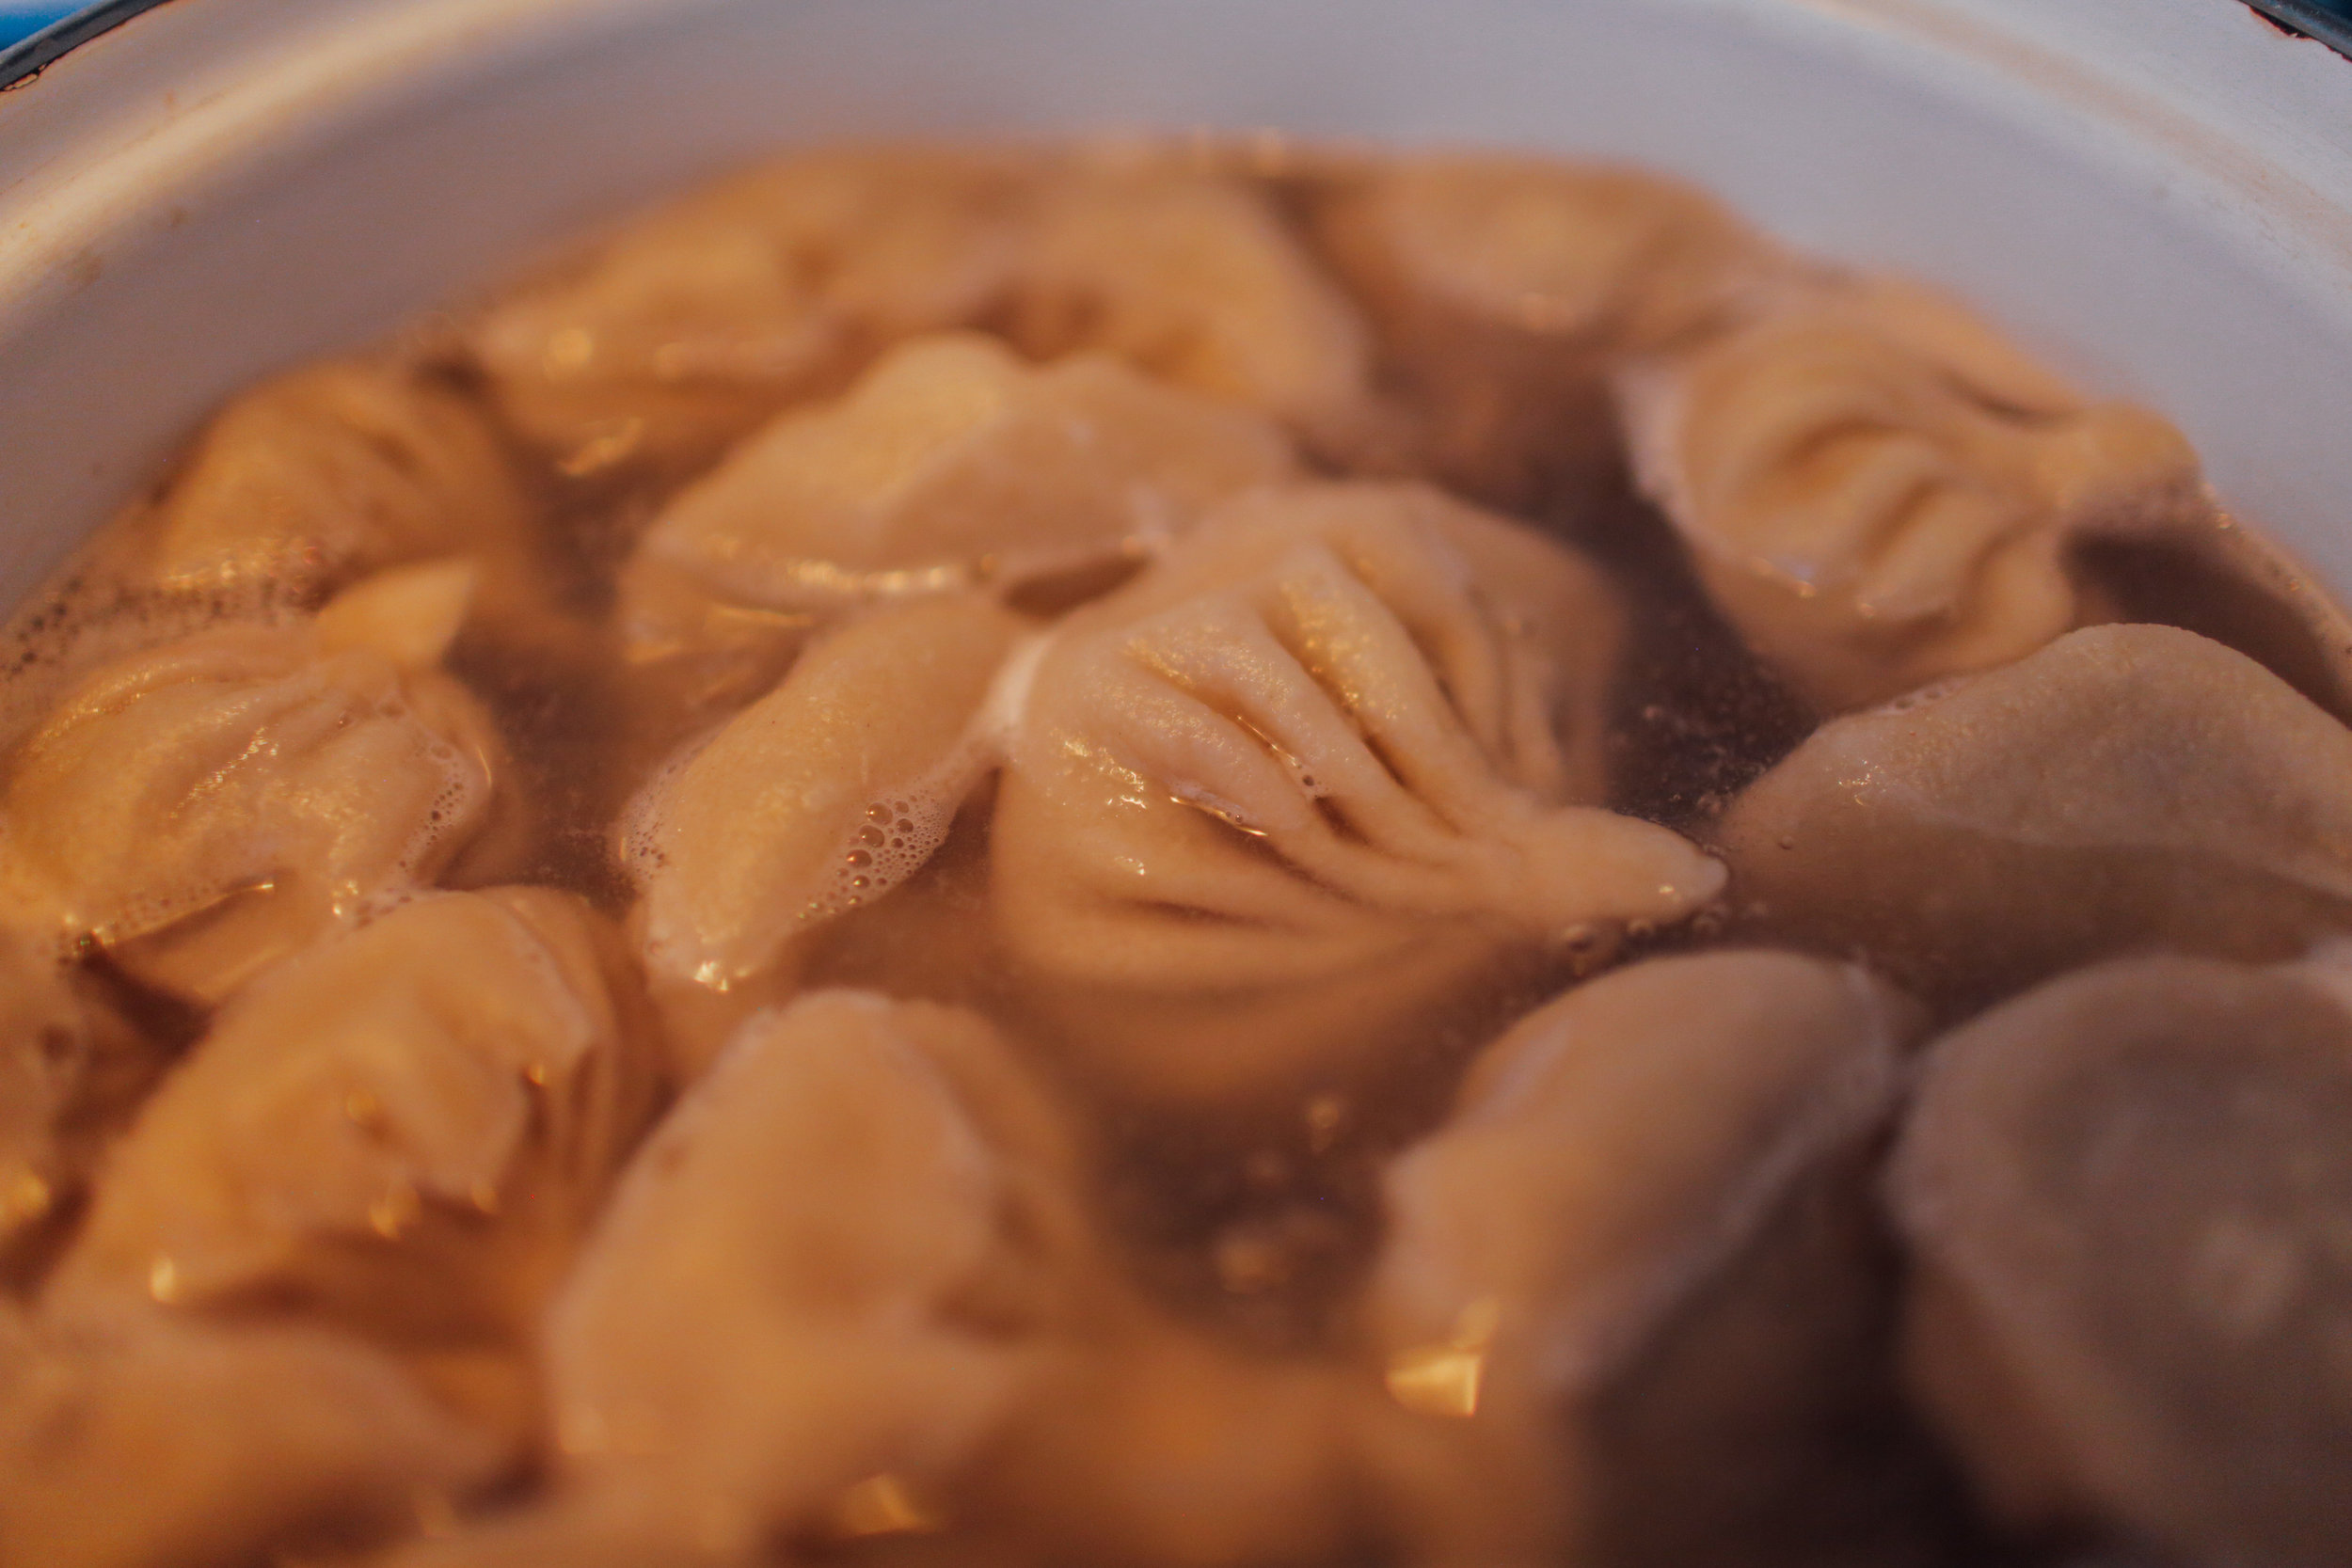  19. Add dumplings to boiling water, bring to a simmer again, and cook for 10-12 minutes. 